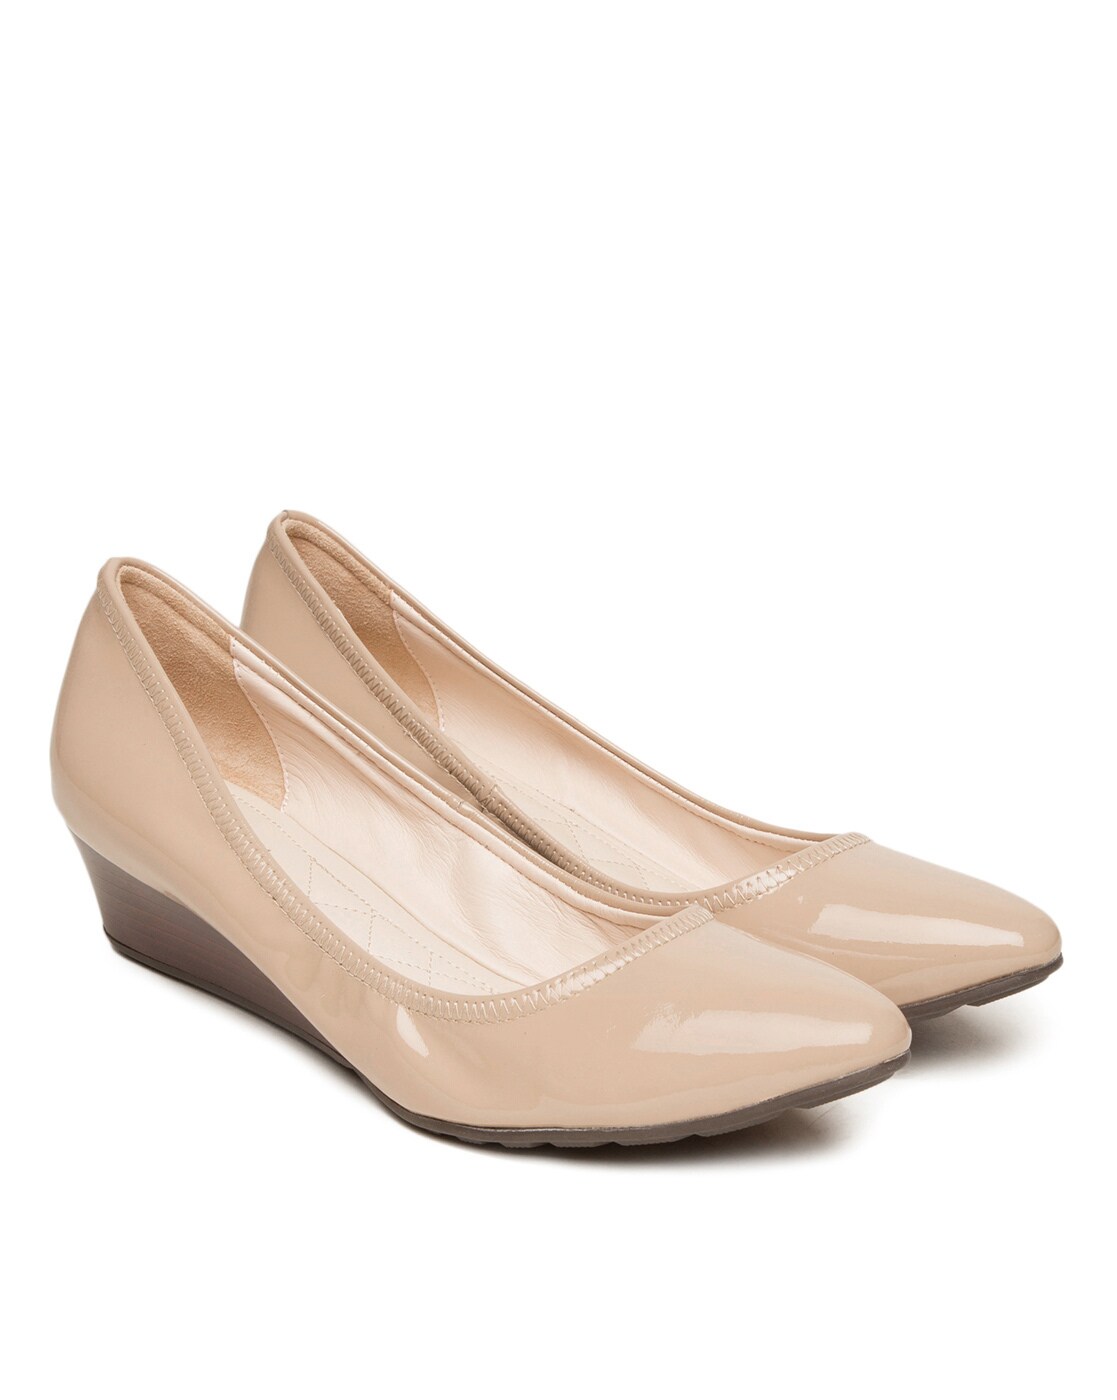 Buy Beige Heeled Shoes for Women by 